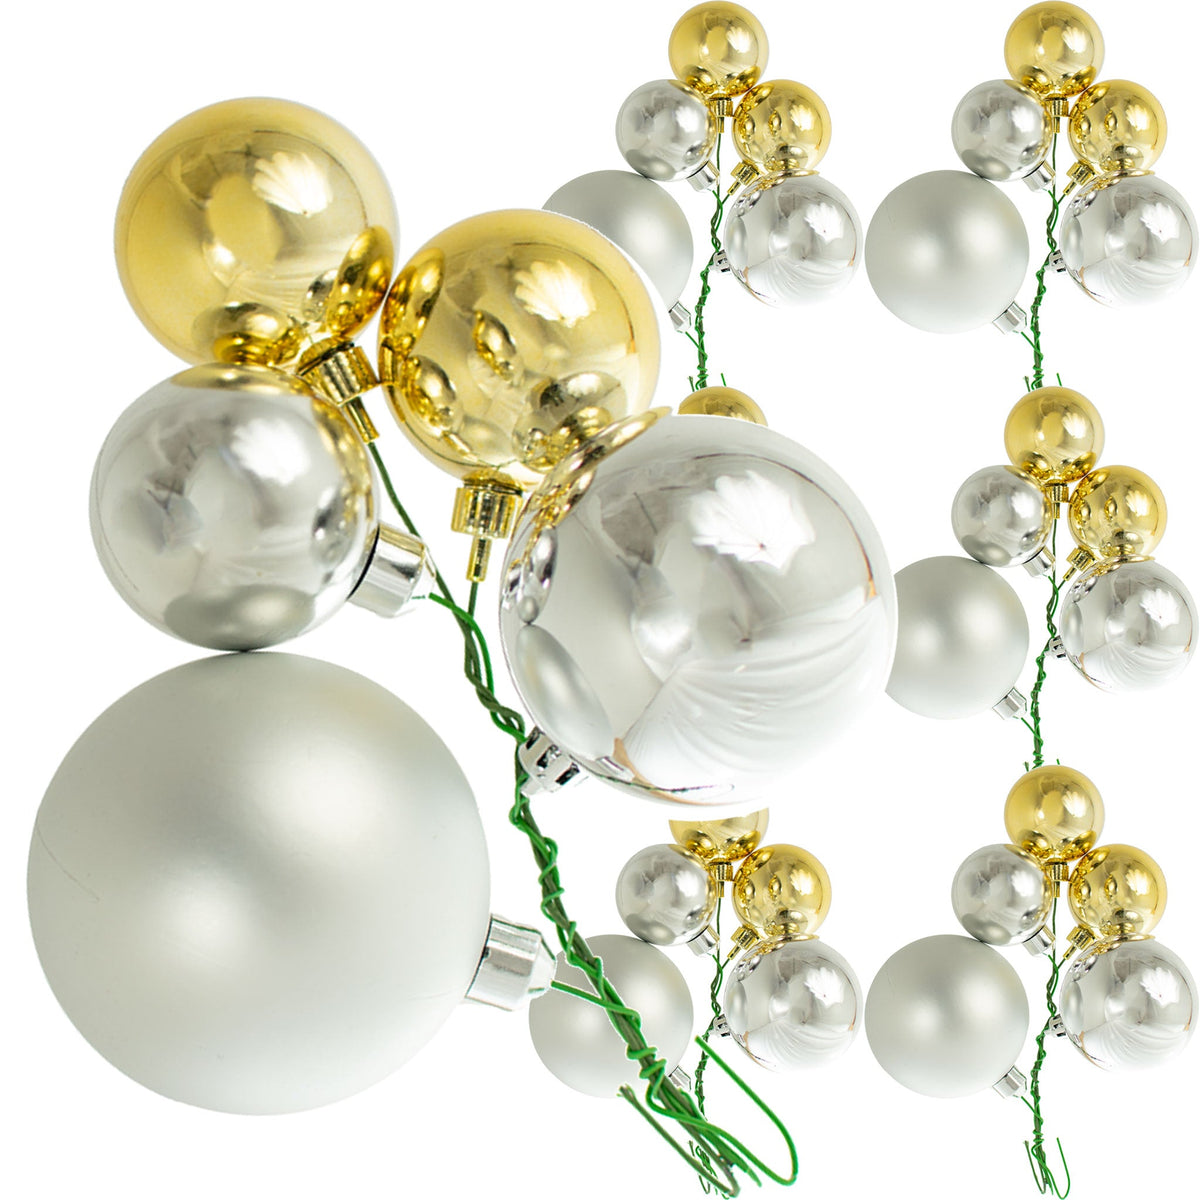 The Beautiful Fremont Christmas Ball Ornament Cluster with Silver and Gold Ball Ornaments comes in sets of 6 from leedisplay.com